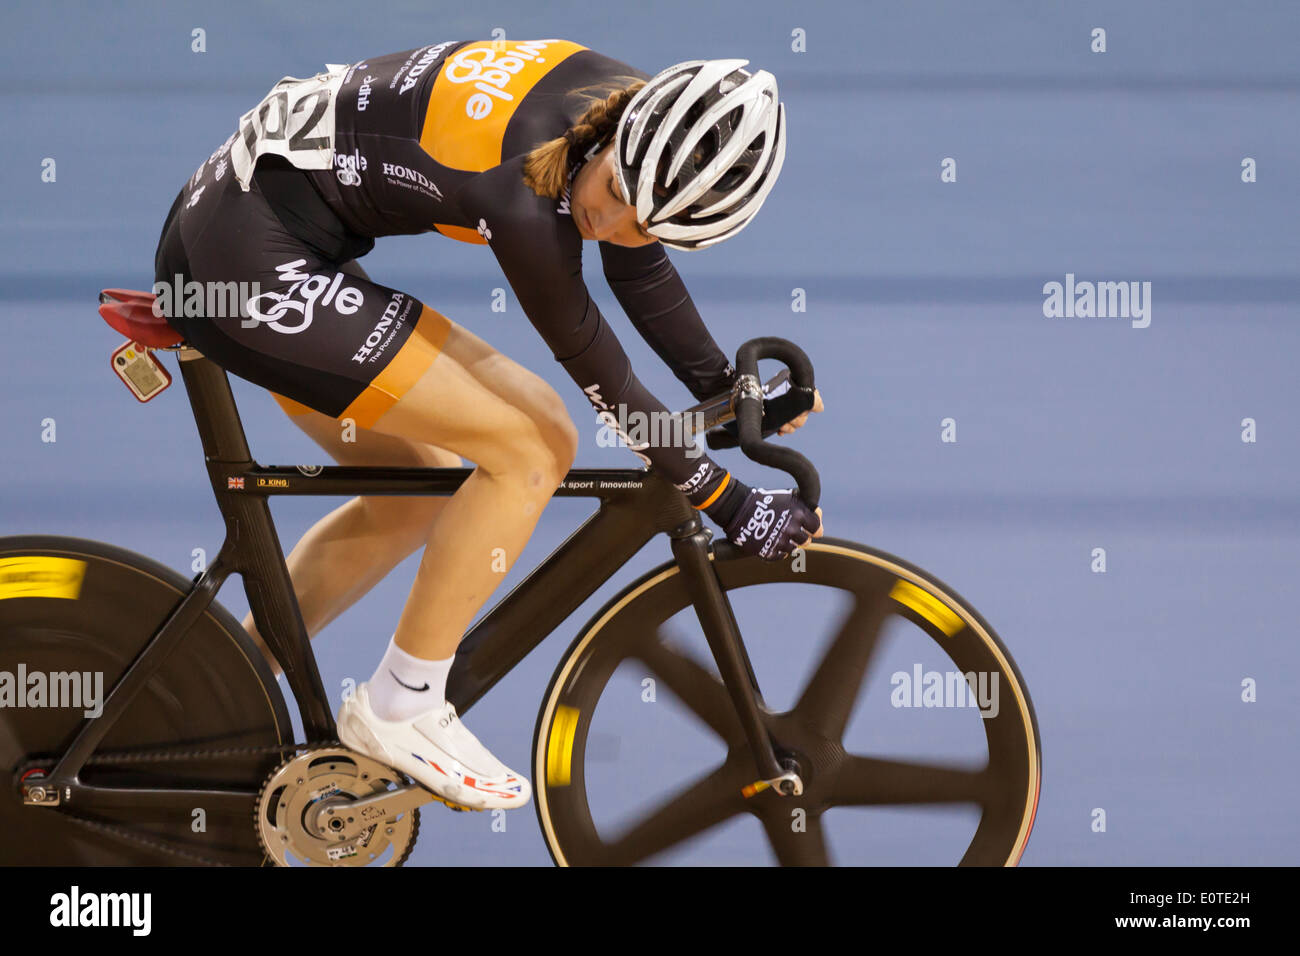 Dani King competes in the Women's Omnium at Revolution 5 2014, Lee Valley Velopark, Stratford Stock Photo